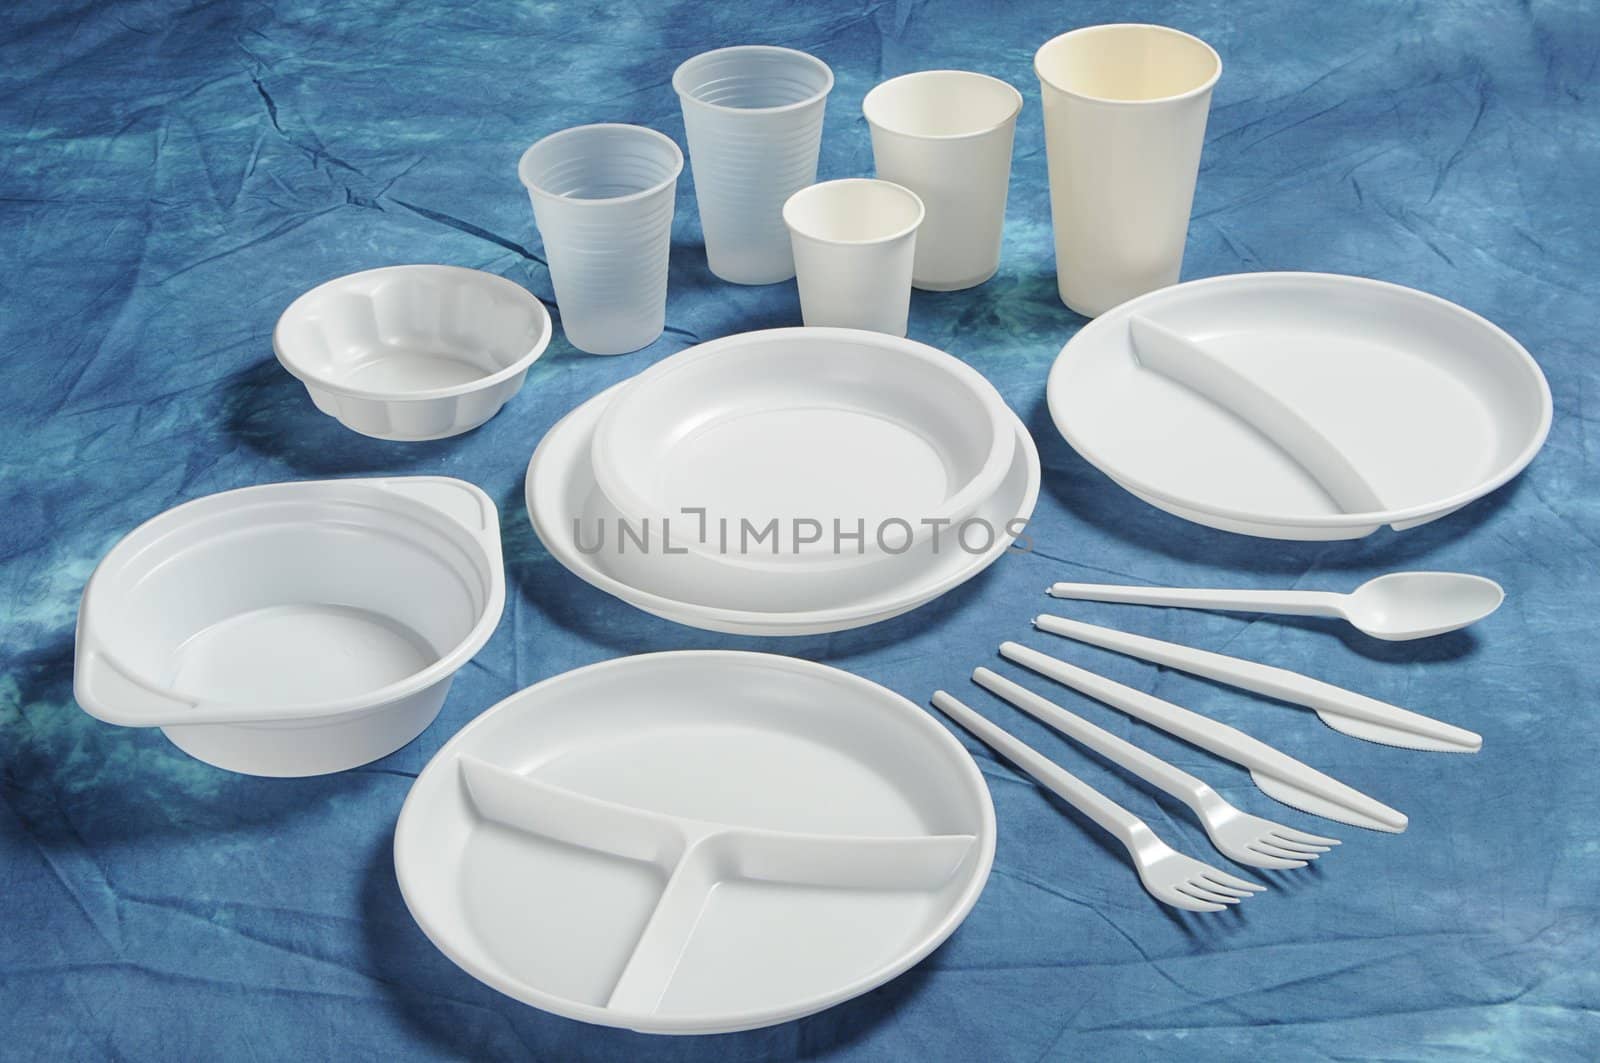 Varieties of disposable plates cups and cutlery